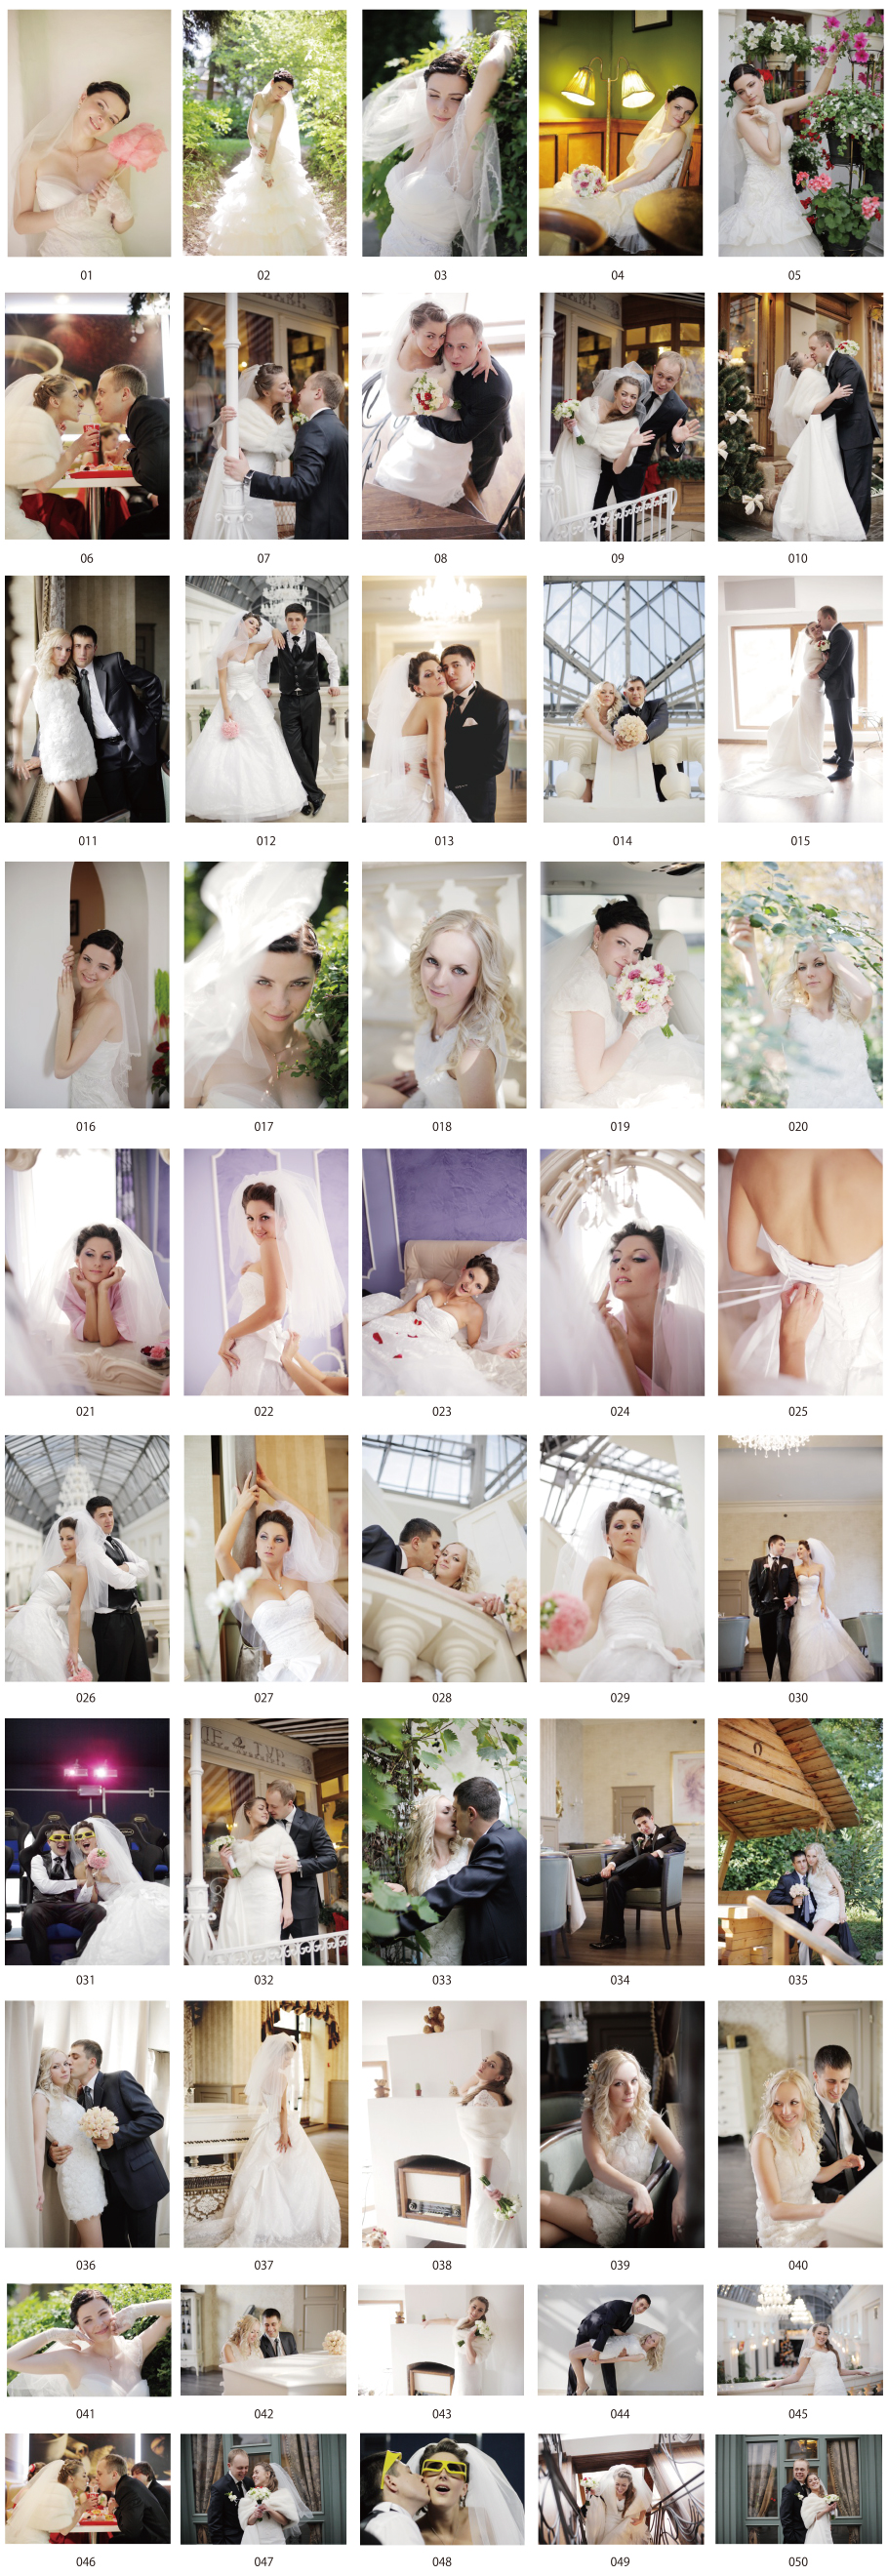 Foreigners wedding photo vol.2